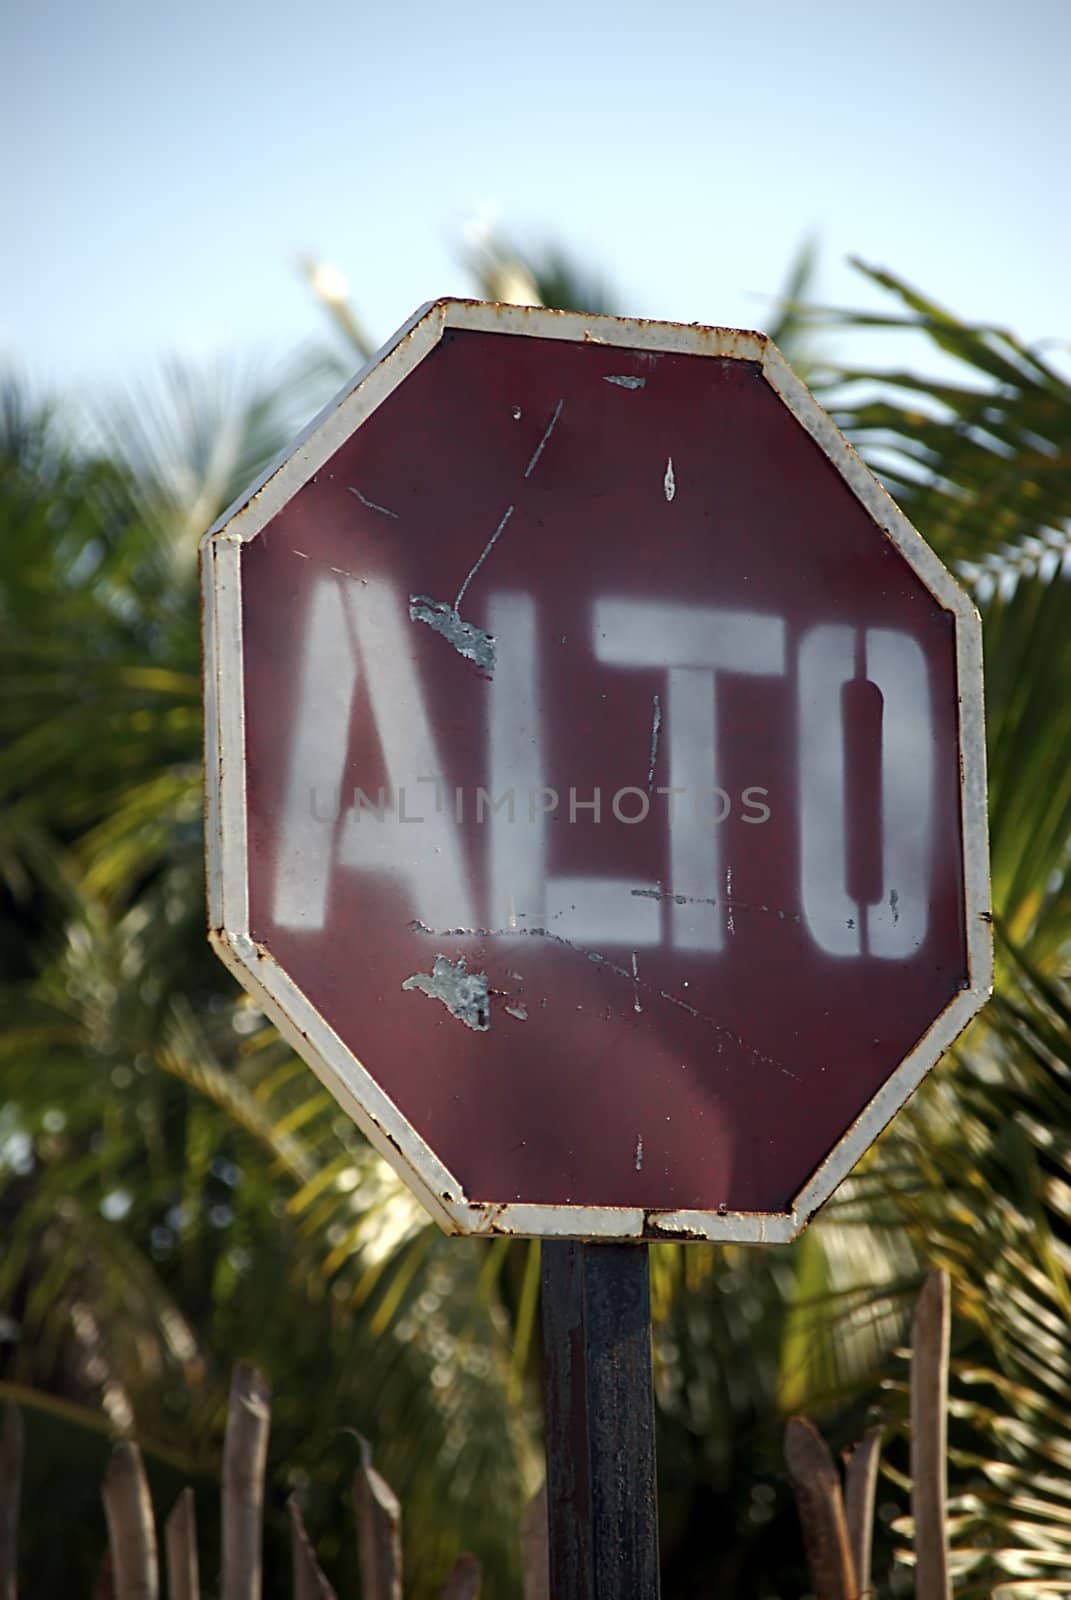 Spanish Stop Sign by npologuy